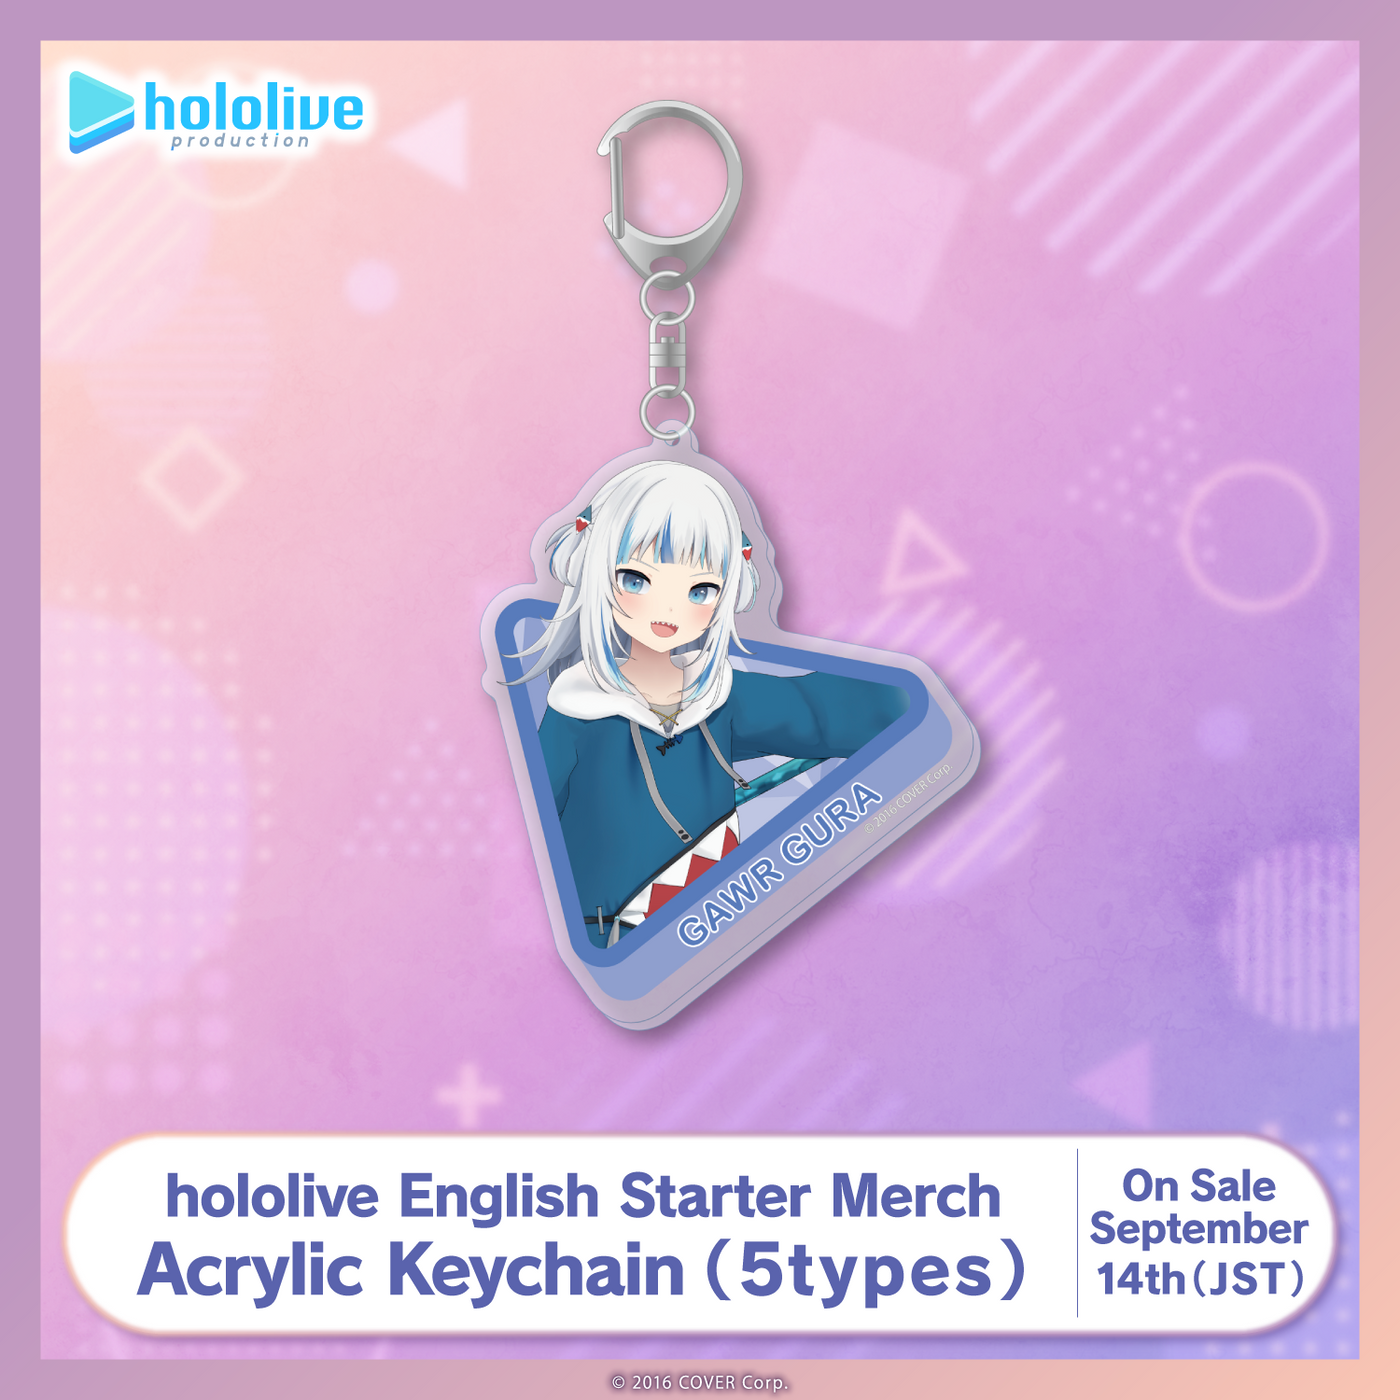 [Pre-order] hololive English Starter Merch - Acrylic Keychain